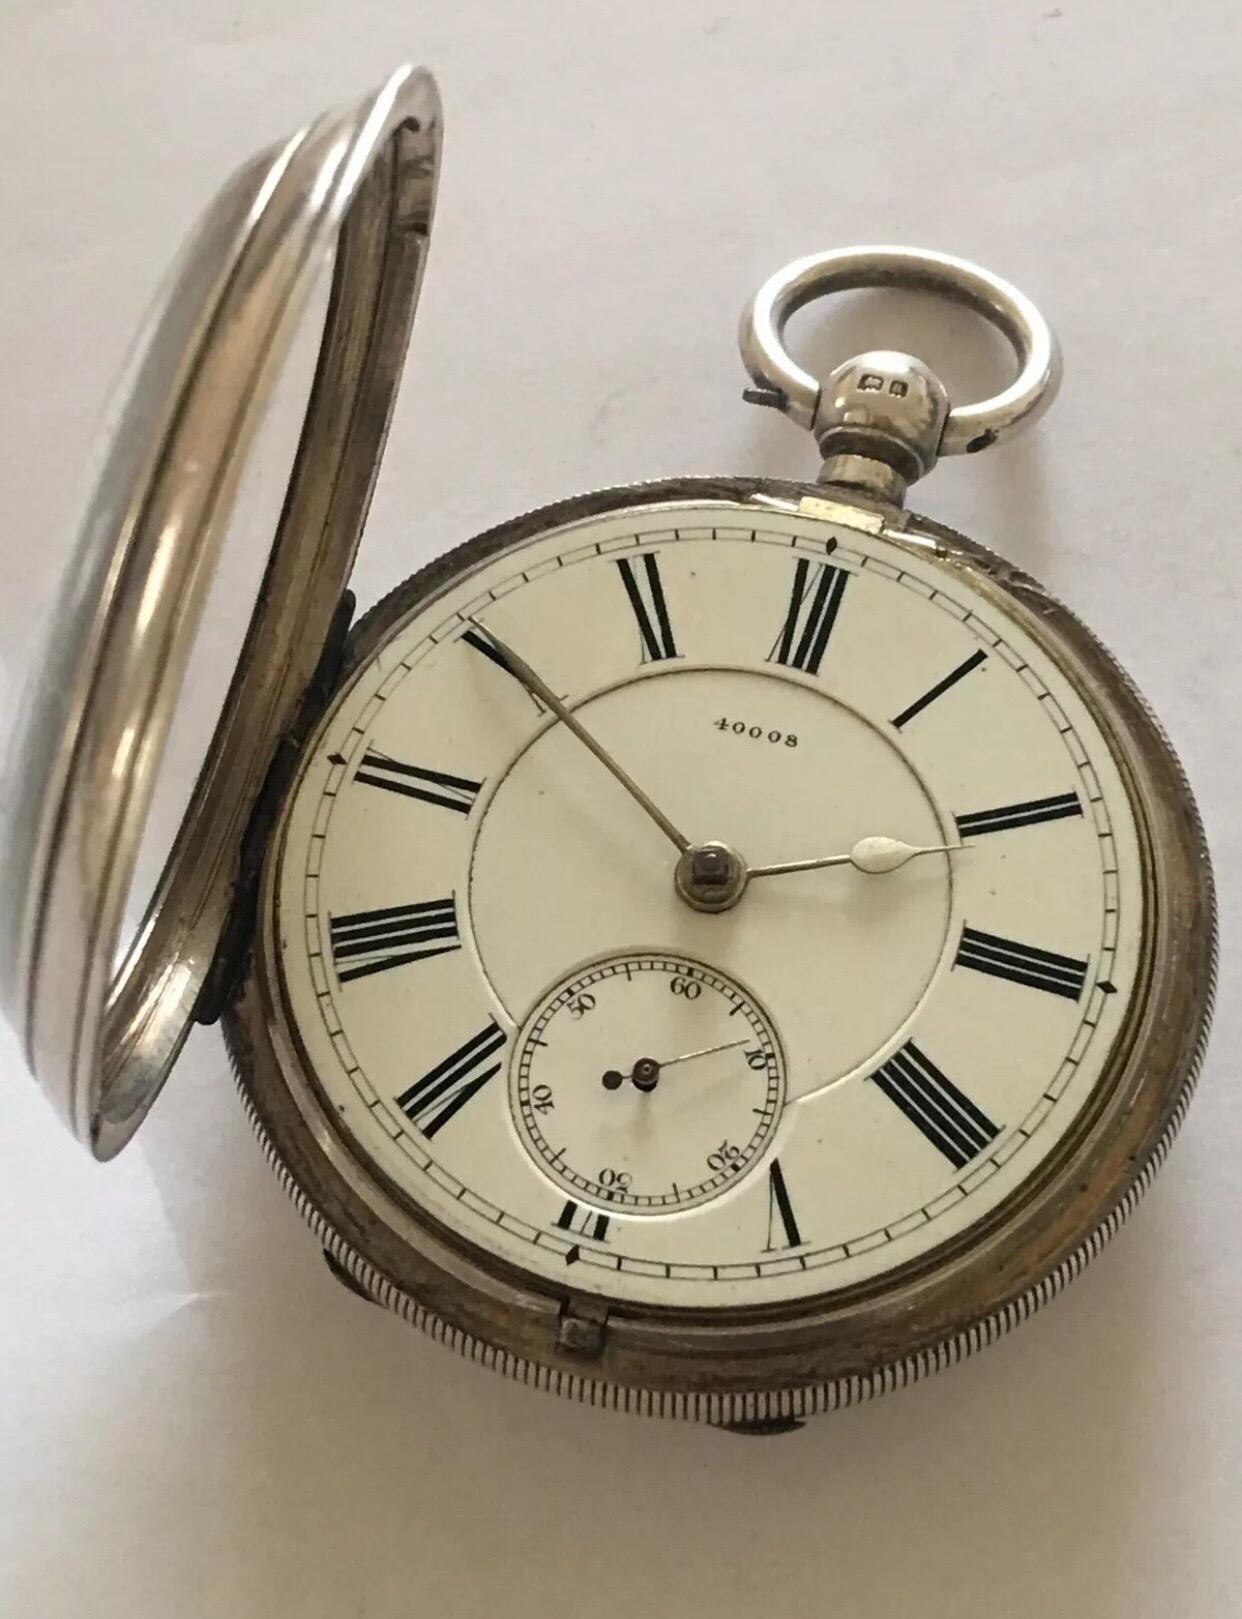 
Antique Silver Pocket Watch Signed A. Leveen, Manchester 40008.


This watch is working and running well. Some  scratches on the glass as shown on the photo.